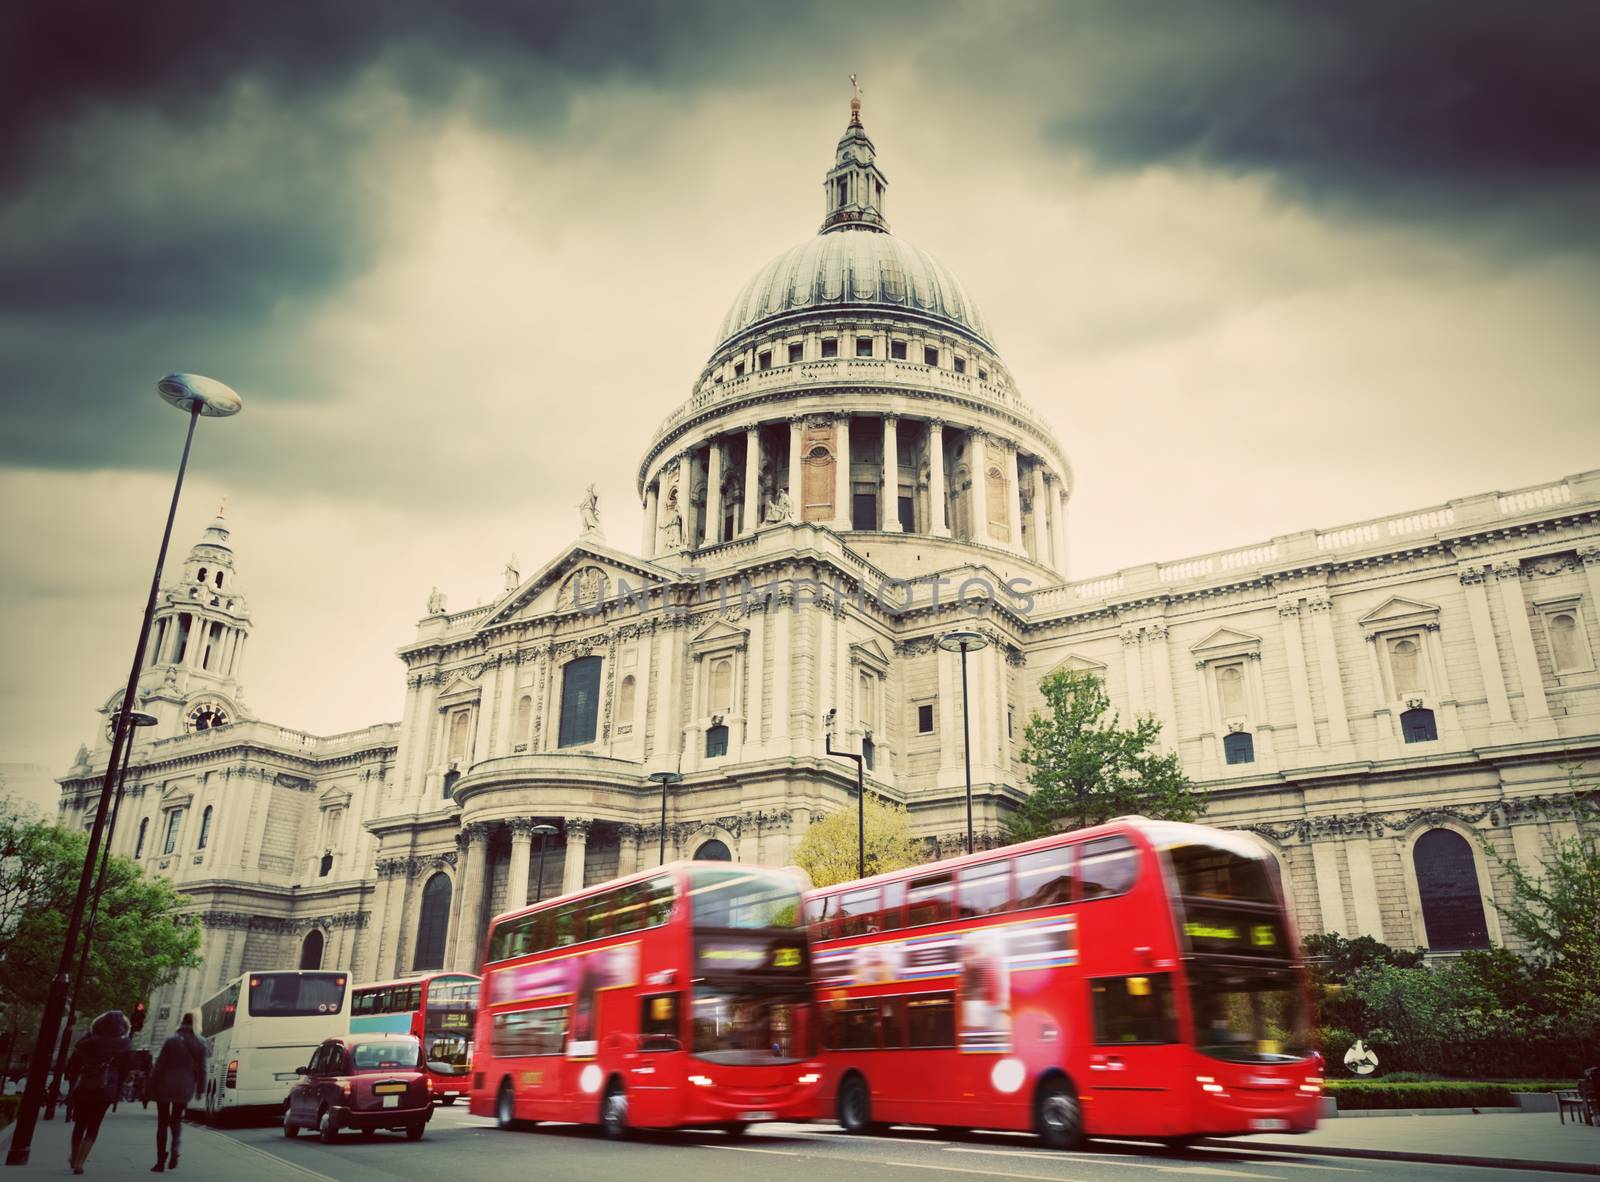 St Paul's Cathedral in London, the UK. Red buses in motion, vintage, retro style